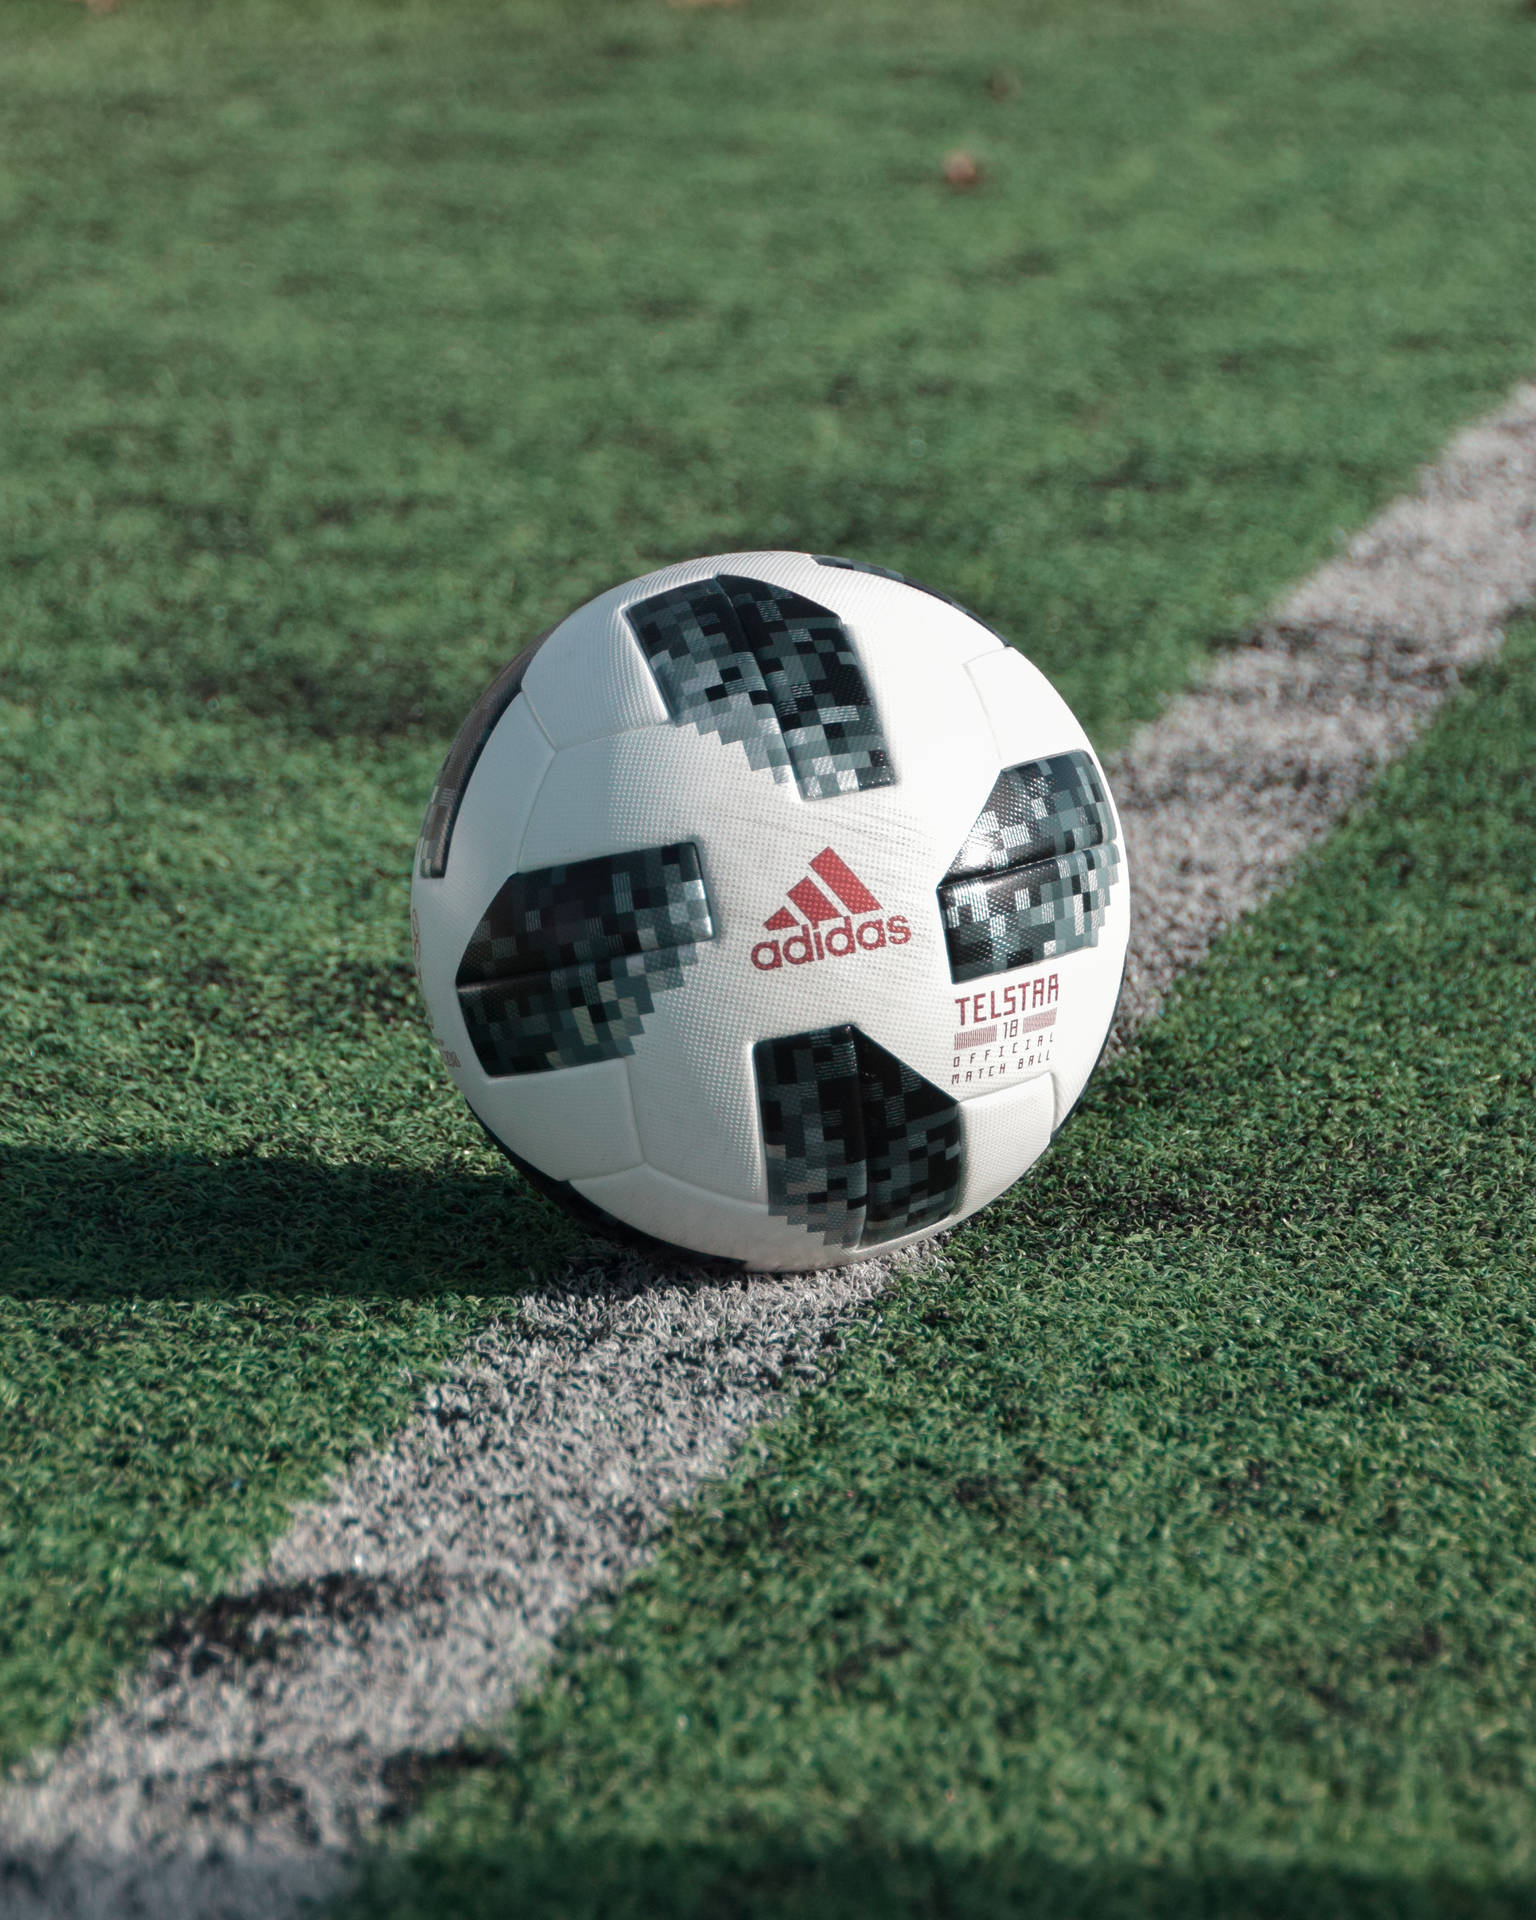 Experience The Magic Of The Fifa World Cup With The Official Match Ball From Adidas Background